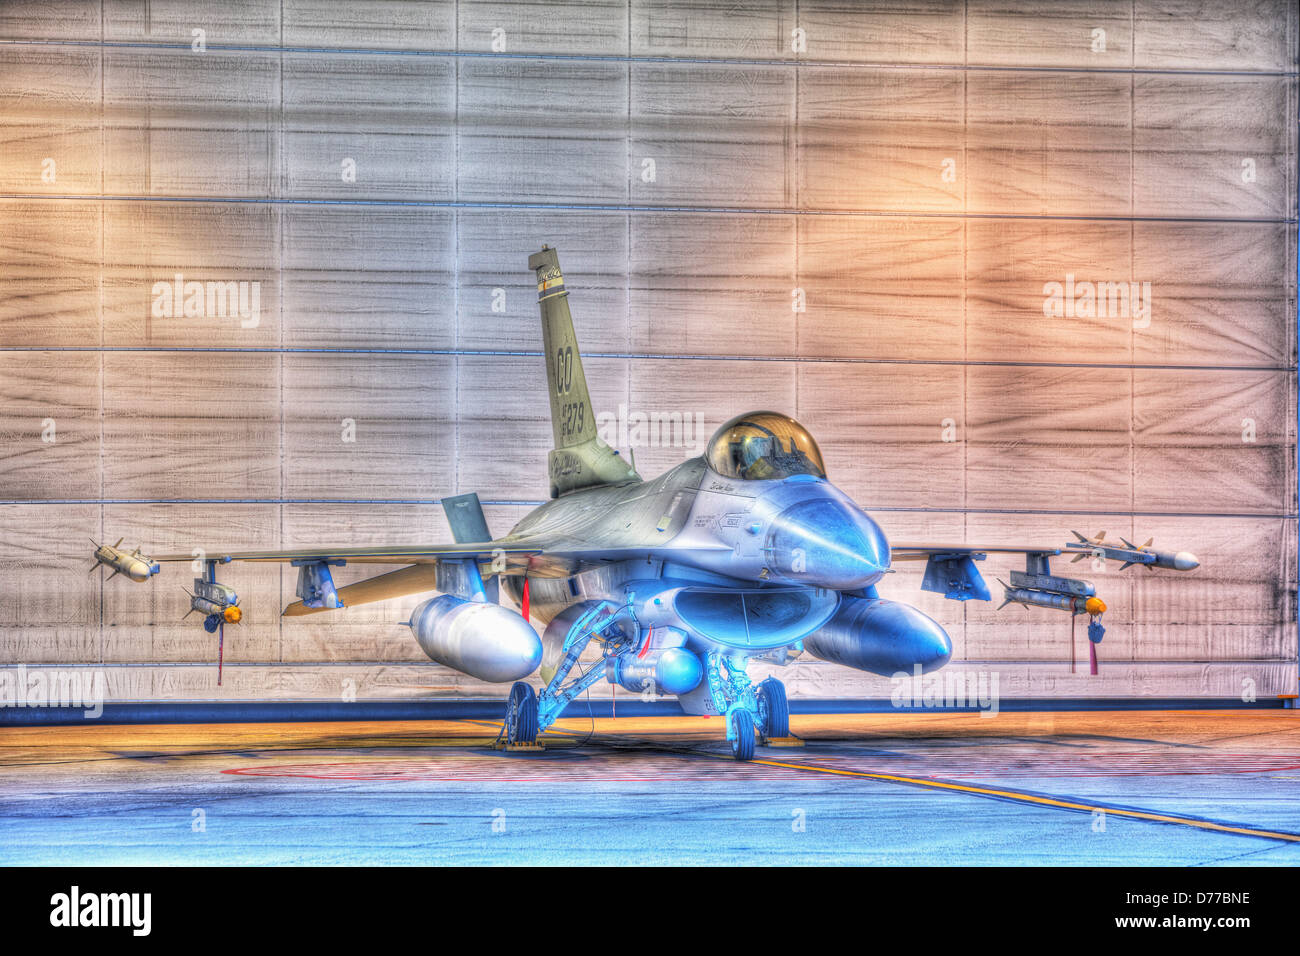 F-16 Alert Jet in Hangar Loaded Live Weapons High Dynamic Range or HDR Image Stock Photo